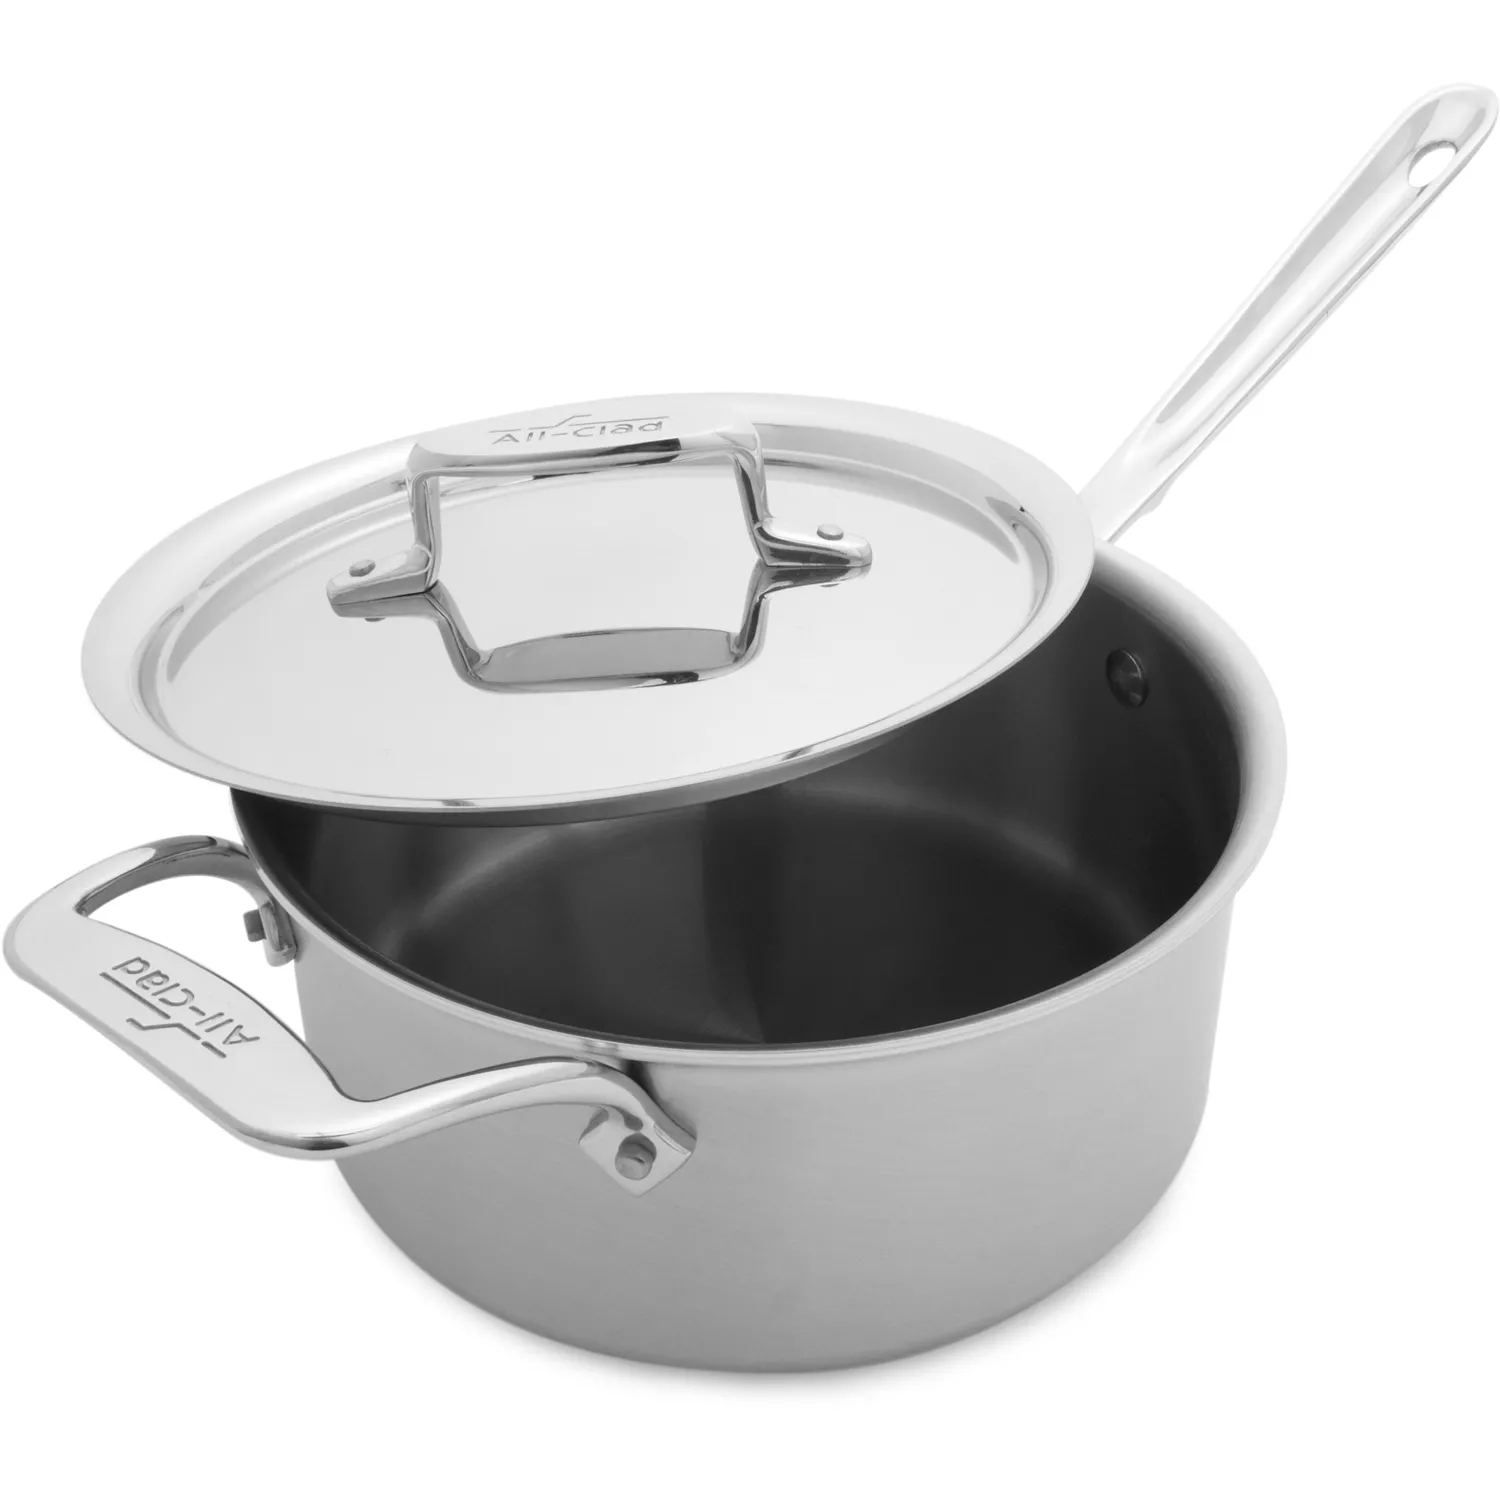 All-Clad D5 Polished Stainless Steel 5-Ply Open 13 inch Skillet